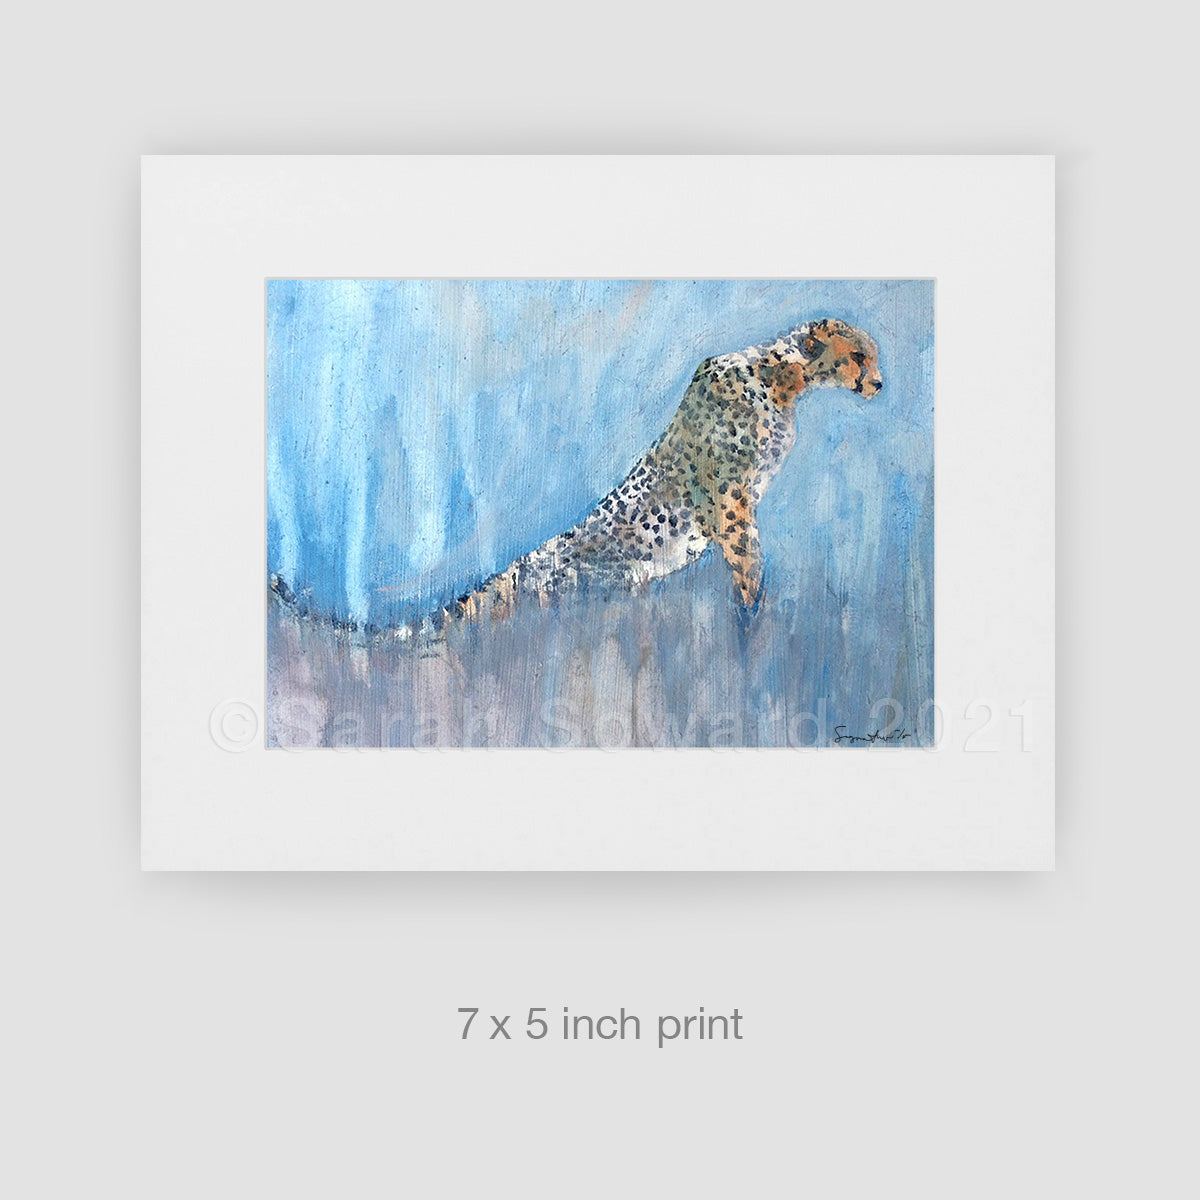 Into the Sunset, Cheetah, Limited Edition Print